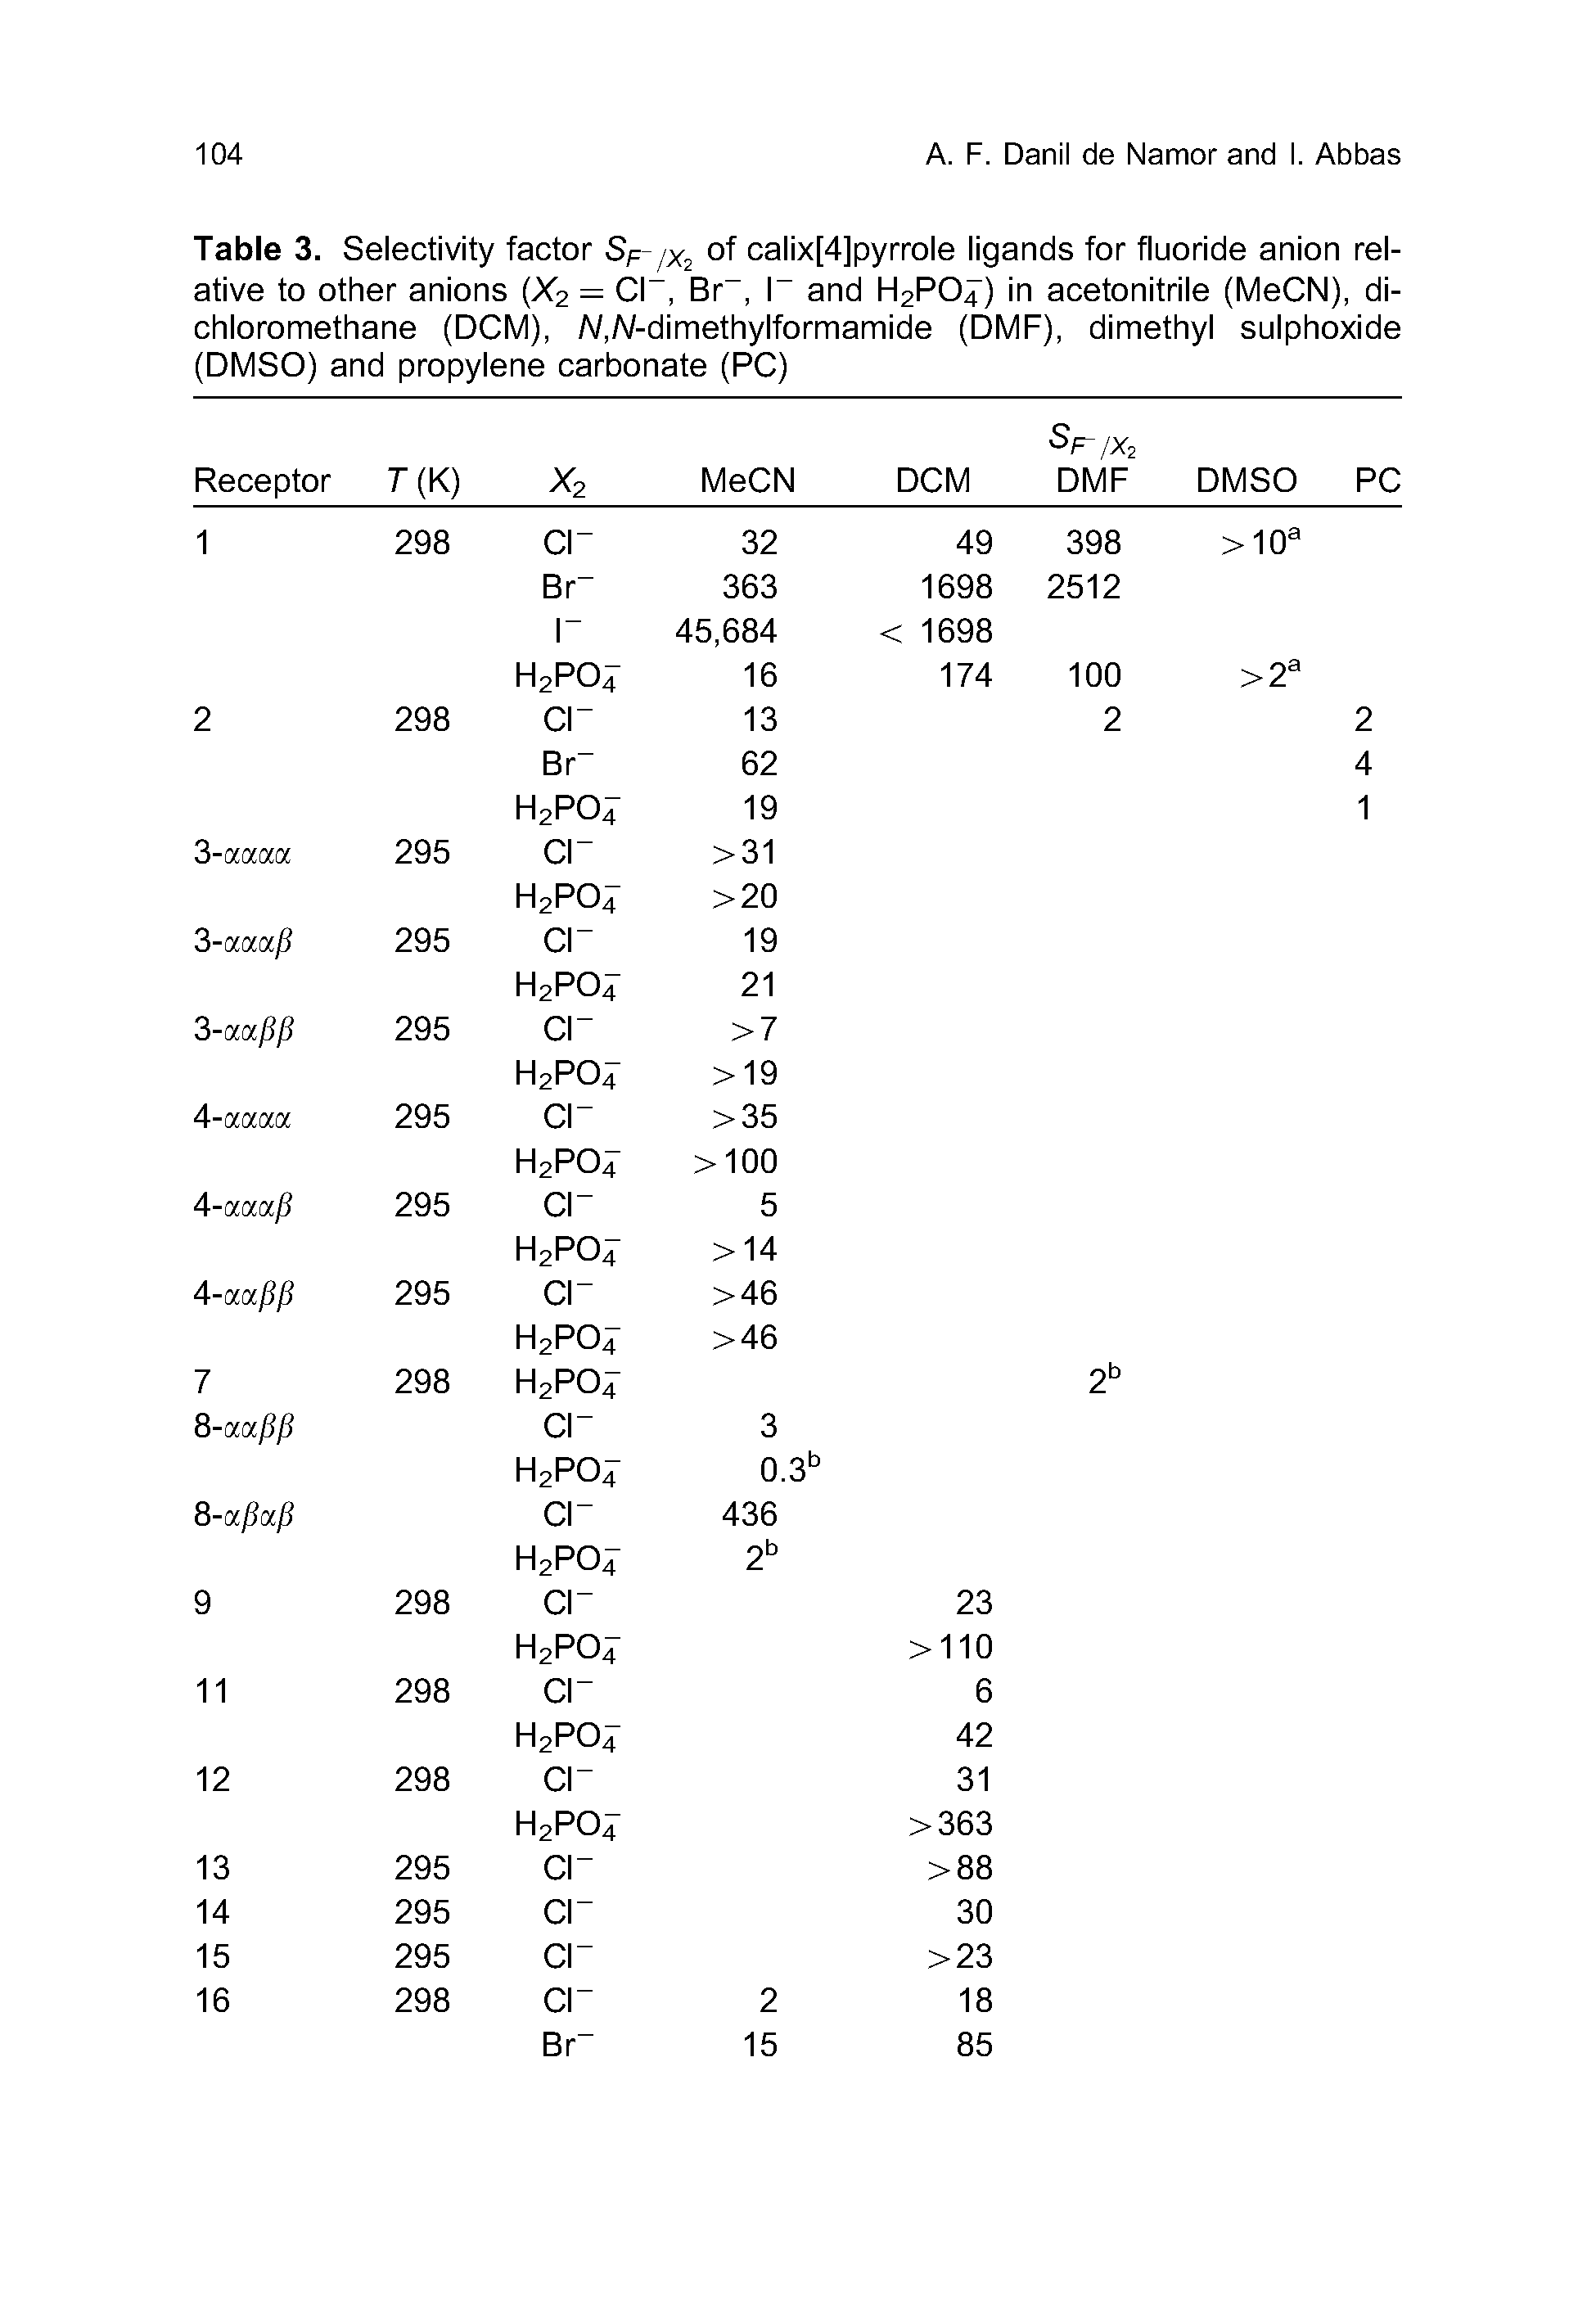 Table 3. Selectivity factor SF-/x2 of calix[4]pyrrole ligands for fluoride anion relative to other anions (X2 = Cl-, Br , I- and H2PO4) in acetonitrile (MeCN), di-chloromethane (DCM), A/,A/-dimethylformamide (DMF), dimethyl sulphoxide (DMSO) and propylene carbonate (PC)...